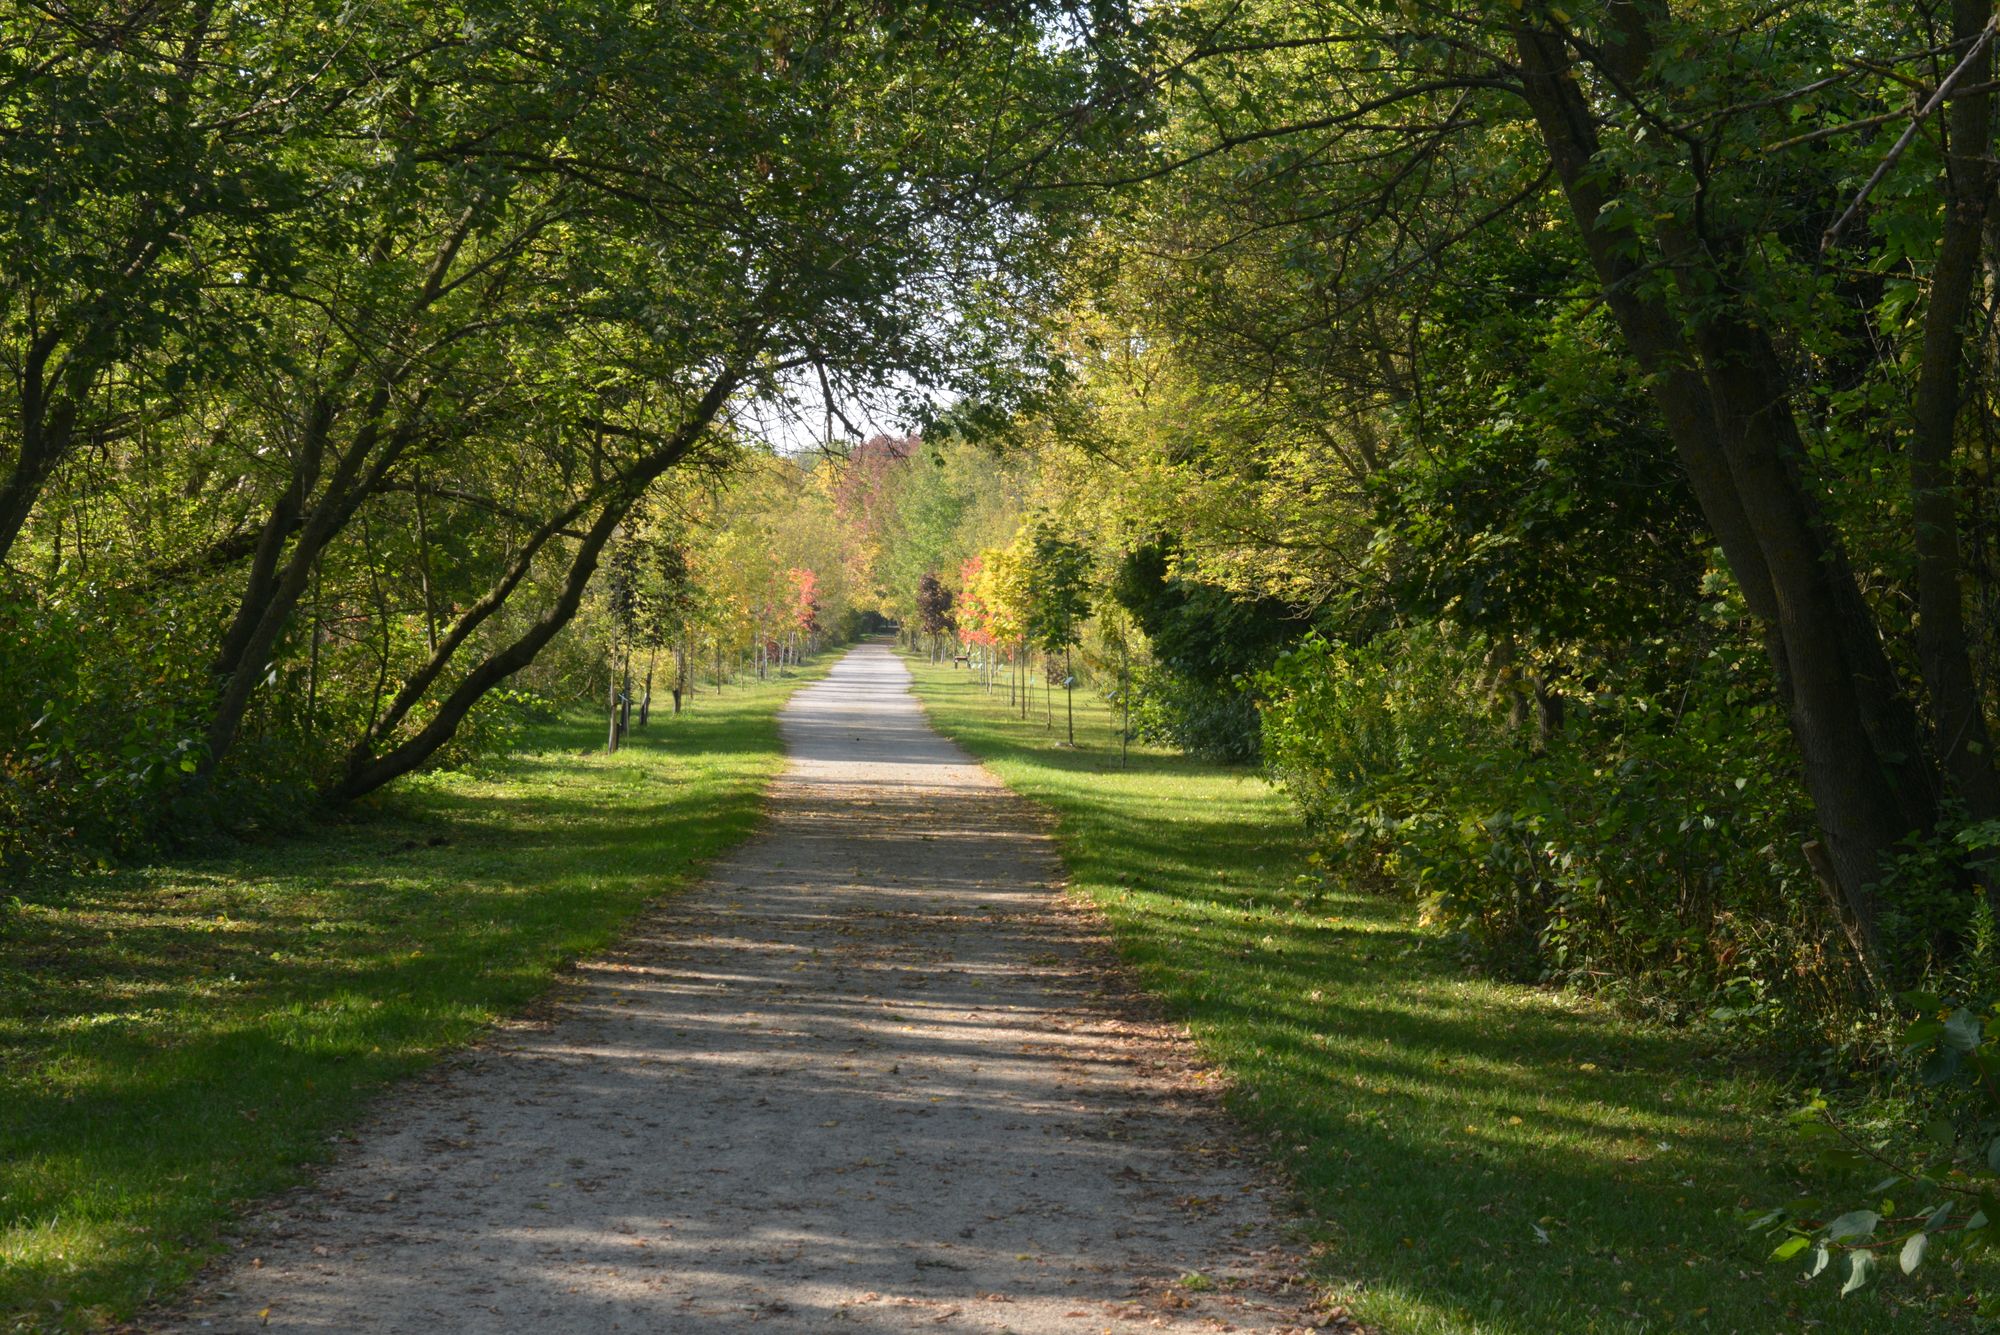 Study shows Trans Canada Trail system provides a range of benefits